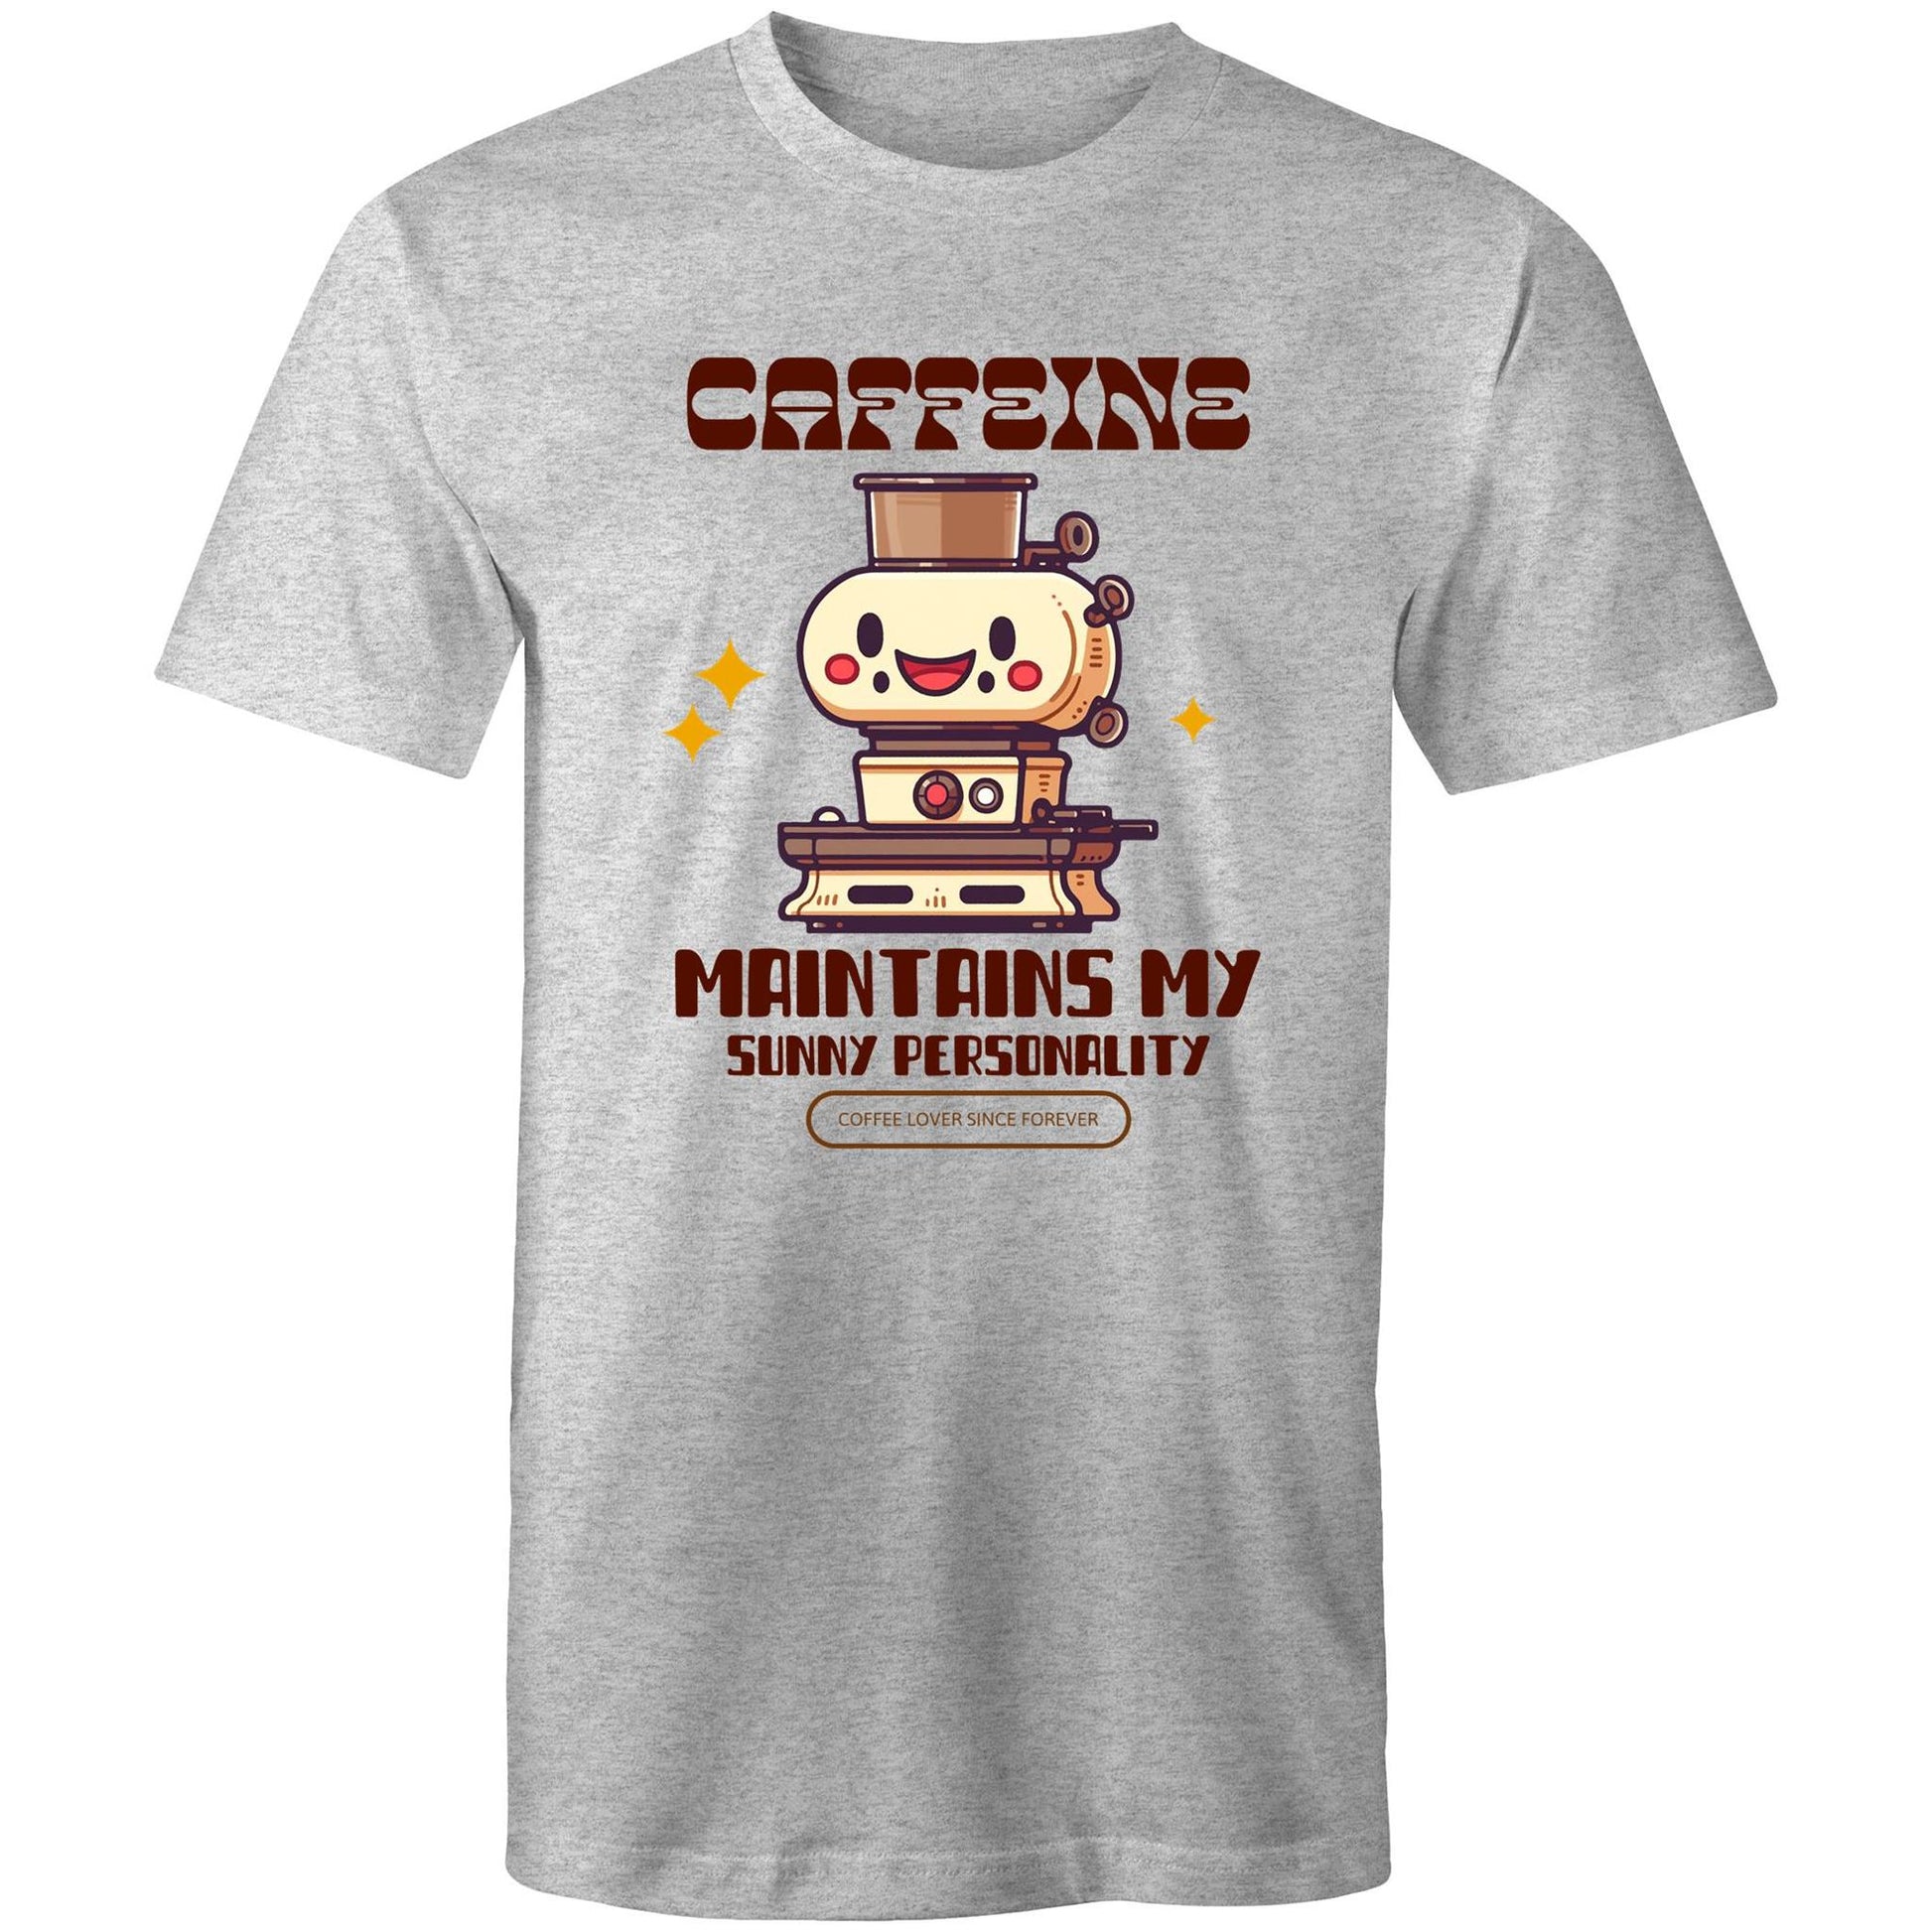 Caffeine Maintains My Sunny Personality - Mens T-Shirt Grey Marle Mens T-shirt Coffee